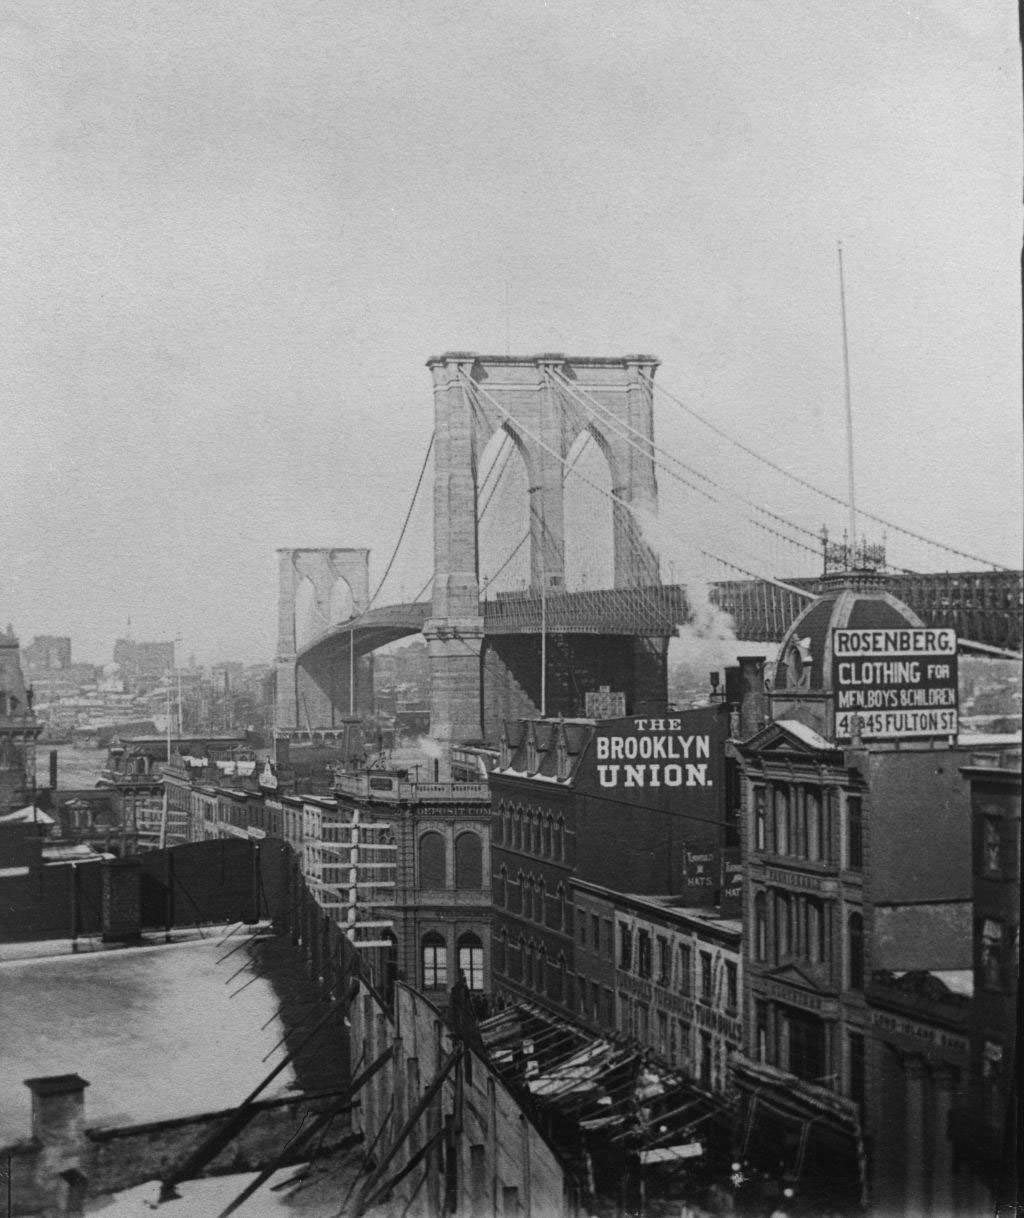 East River Bridge: Spanning The East River Between Manhattan And Brooklyn, New York City, 1895.